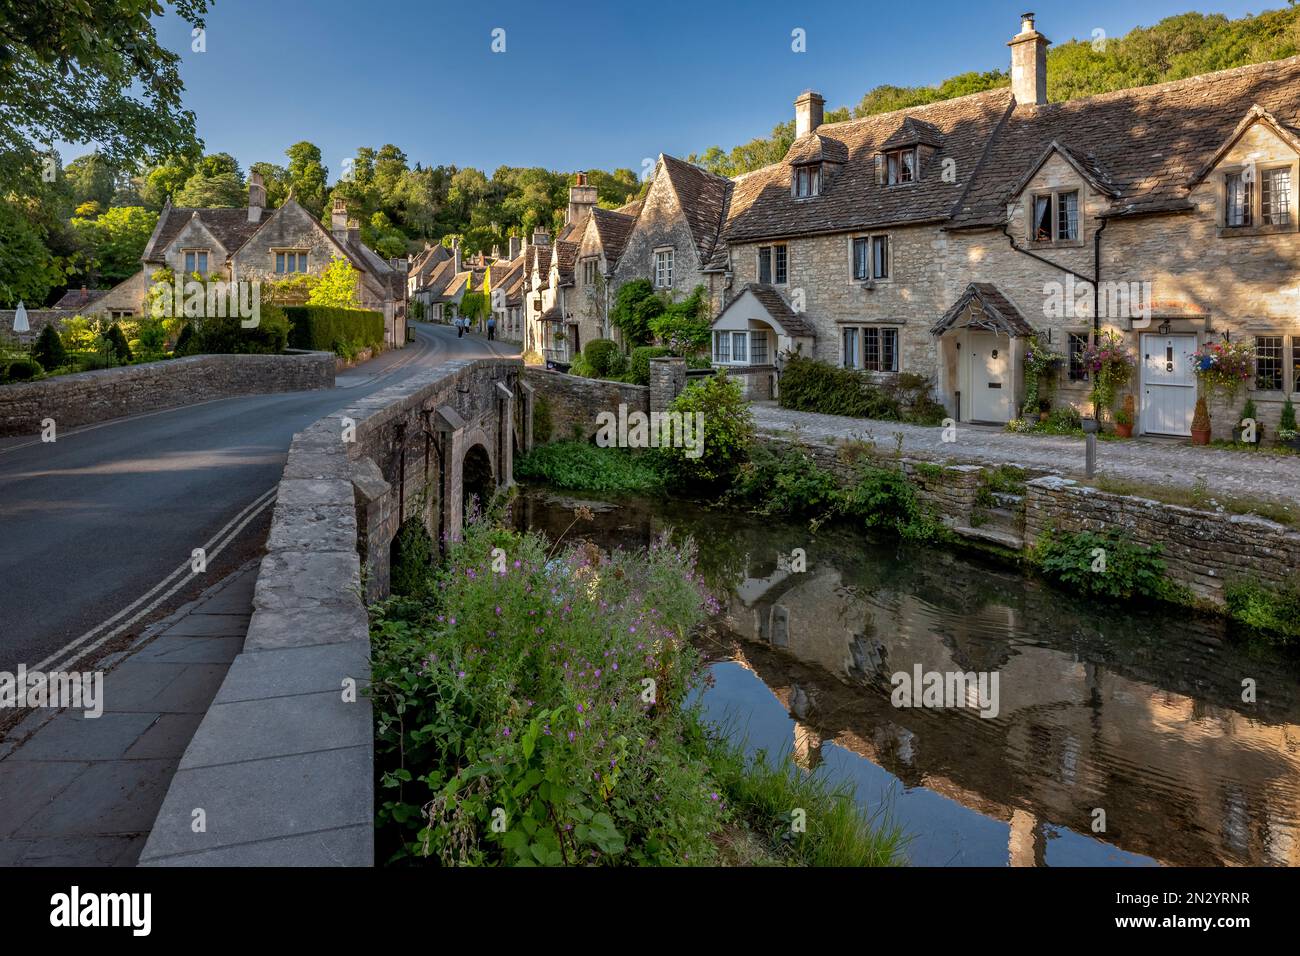 Castello Combe, Cotswolds, Wiltshire, Inghilterra. Foto Stock